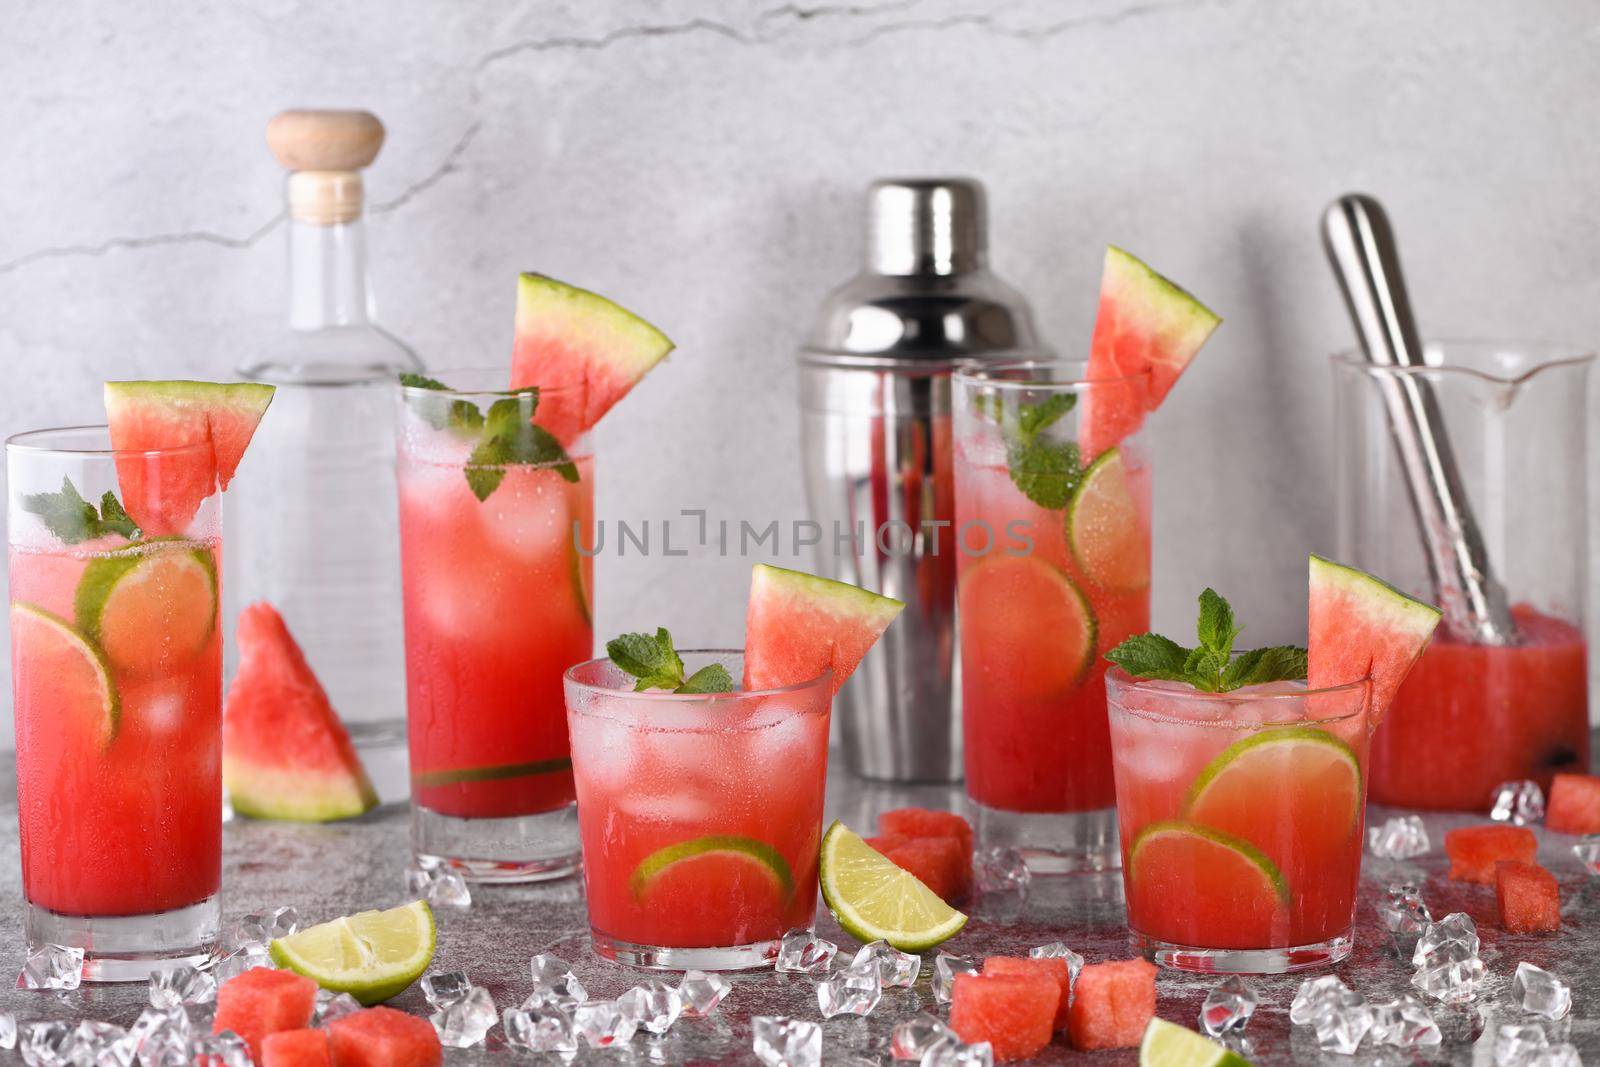 Vodka "Watermelon Cocktail" - made from fresh chilled watermelon, coconut sugar, fresh lime juice and vodka. Enjoy this light, refreshing, summer party cocktail